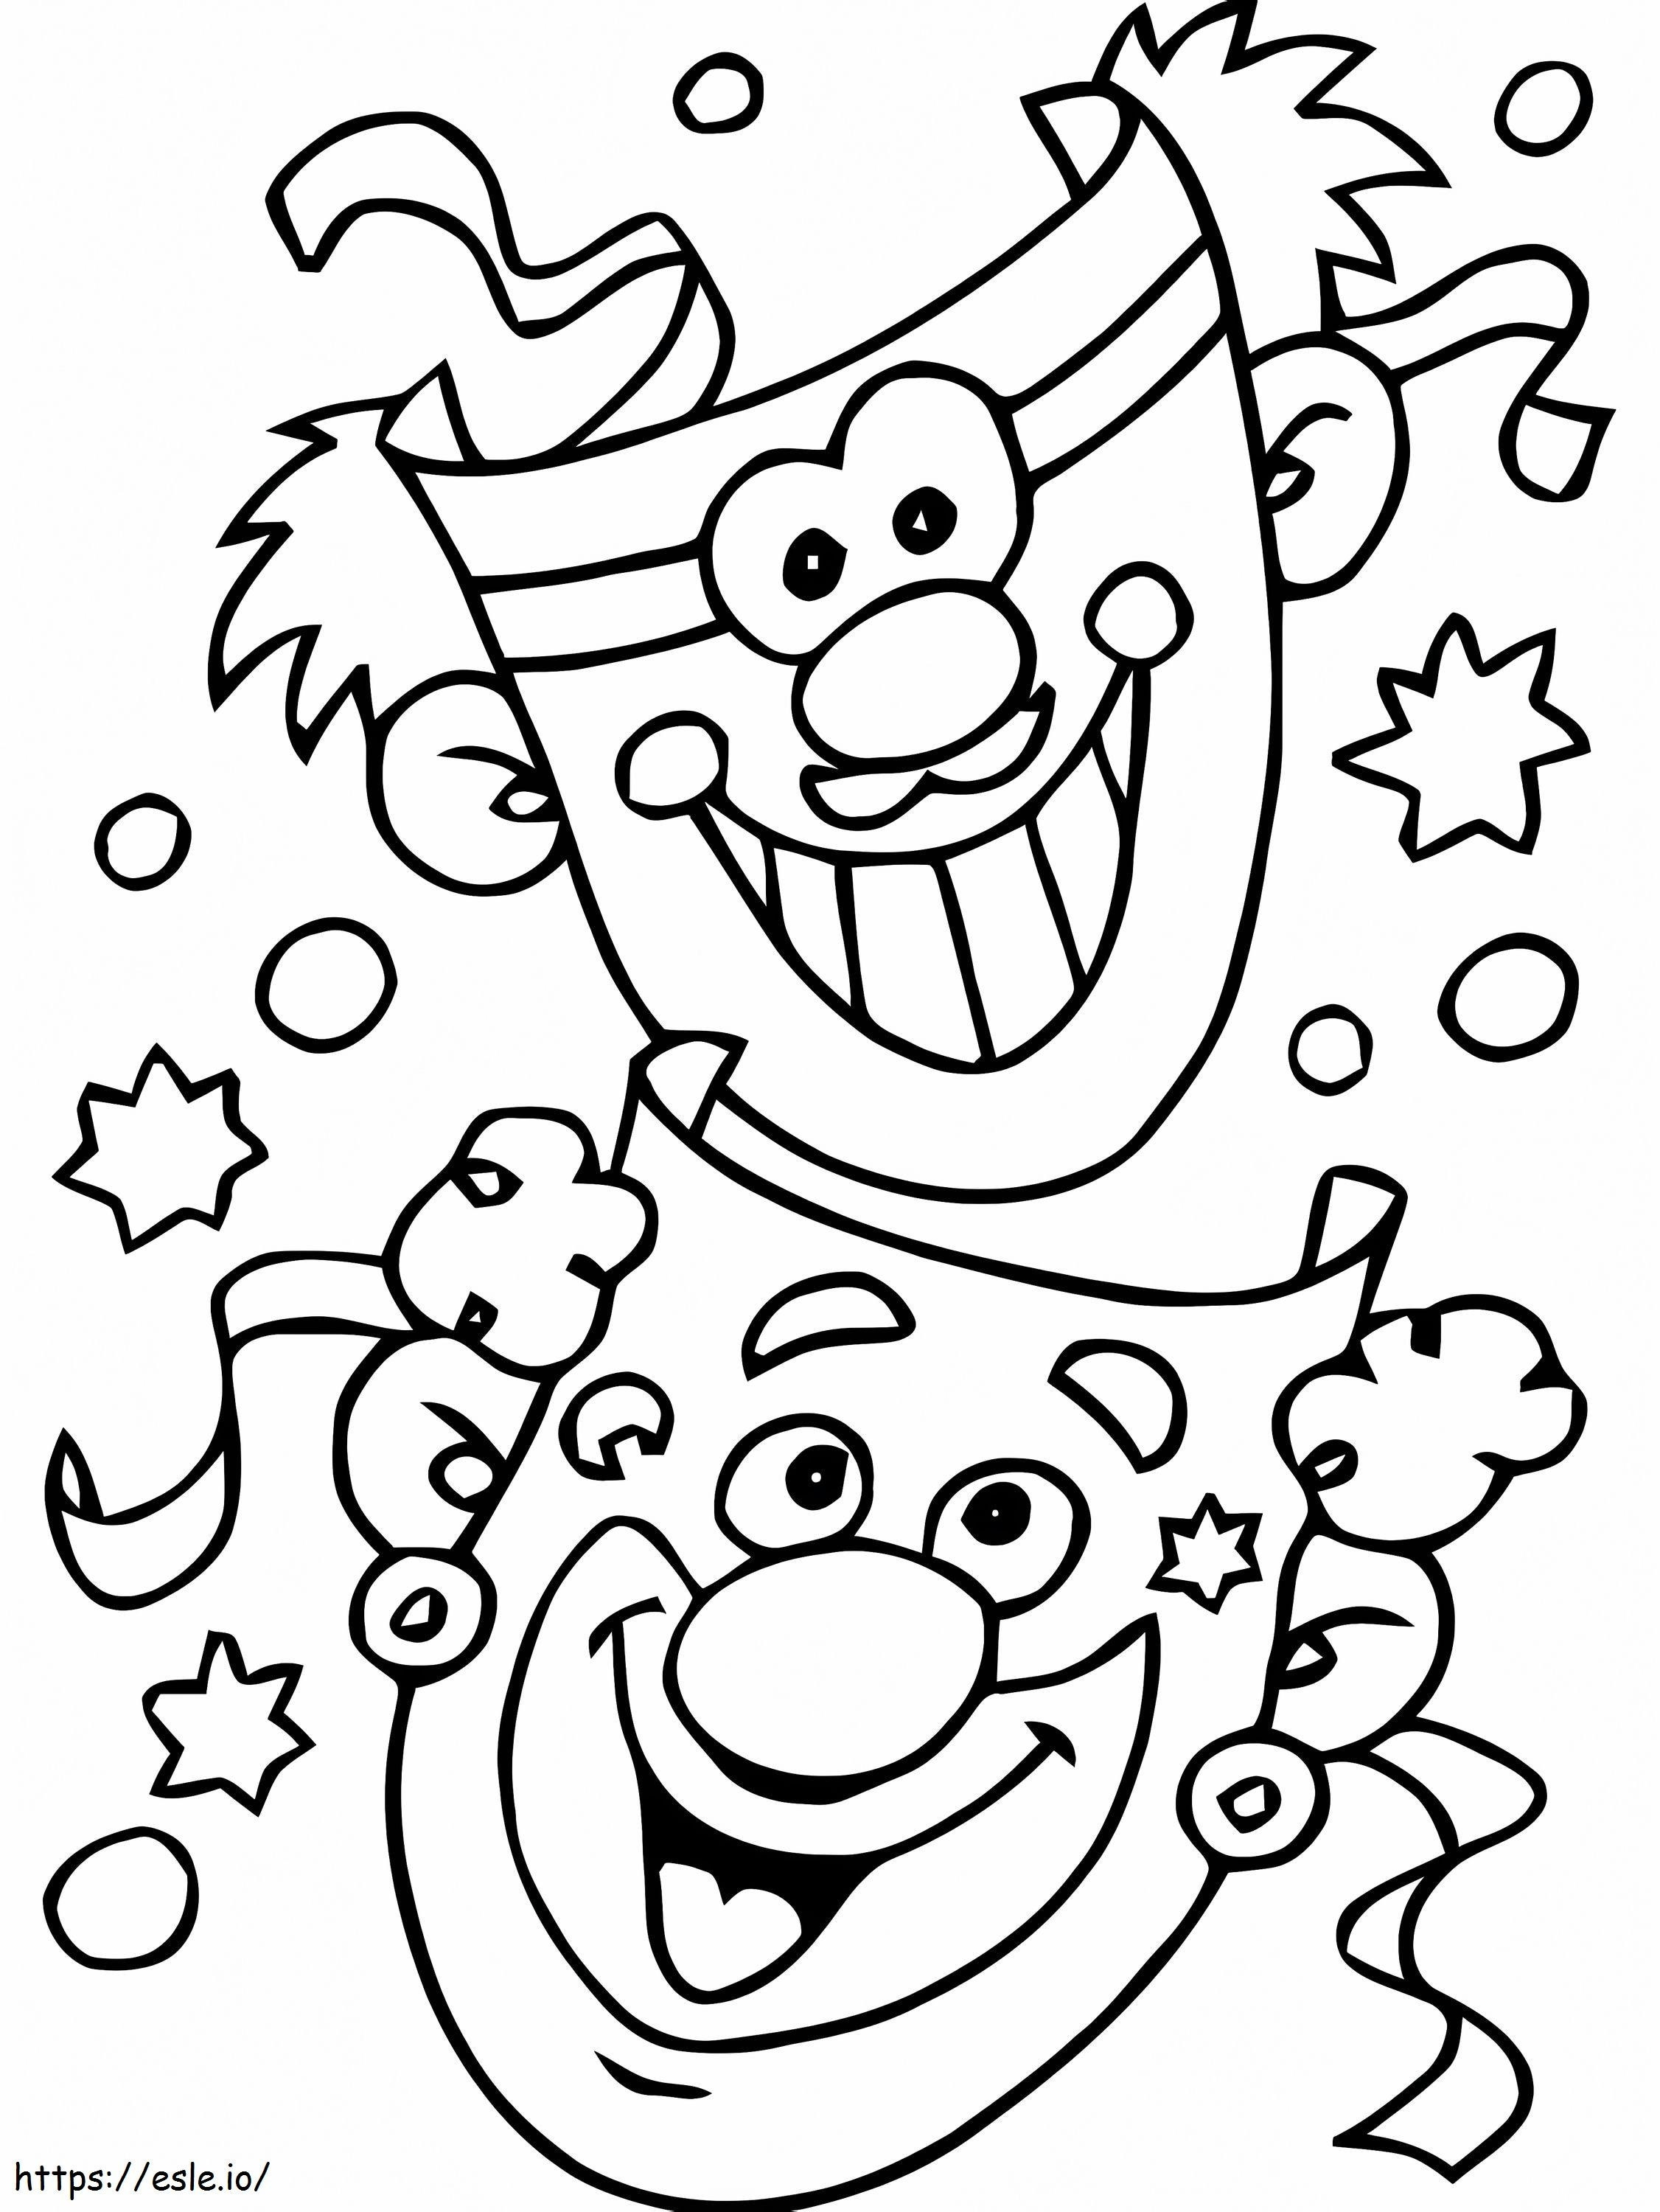 Funny Carnival Masks coloring page